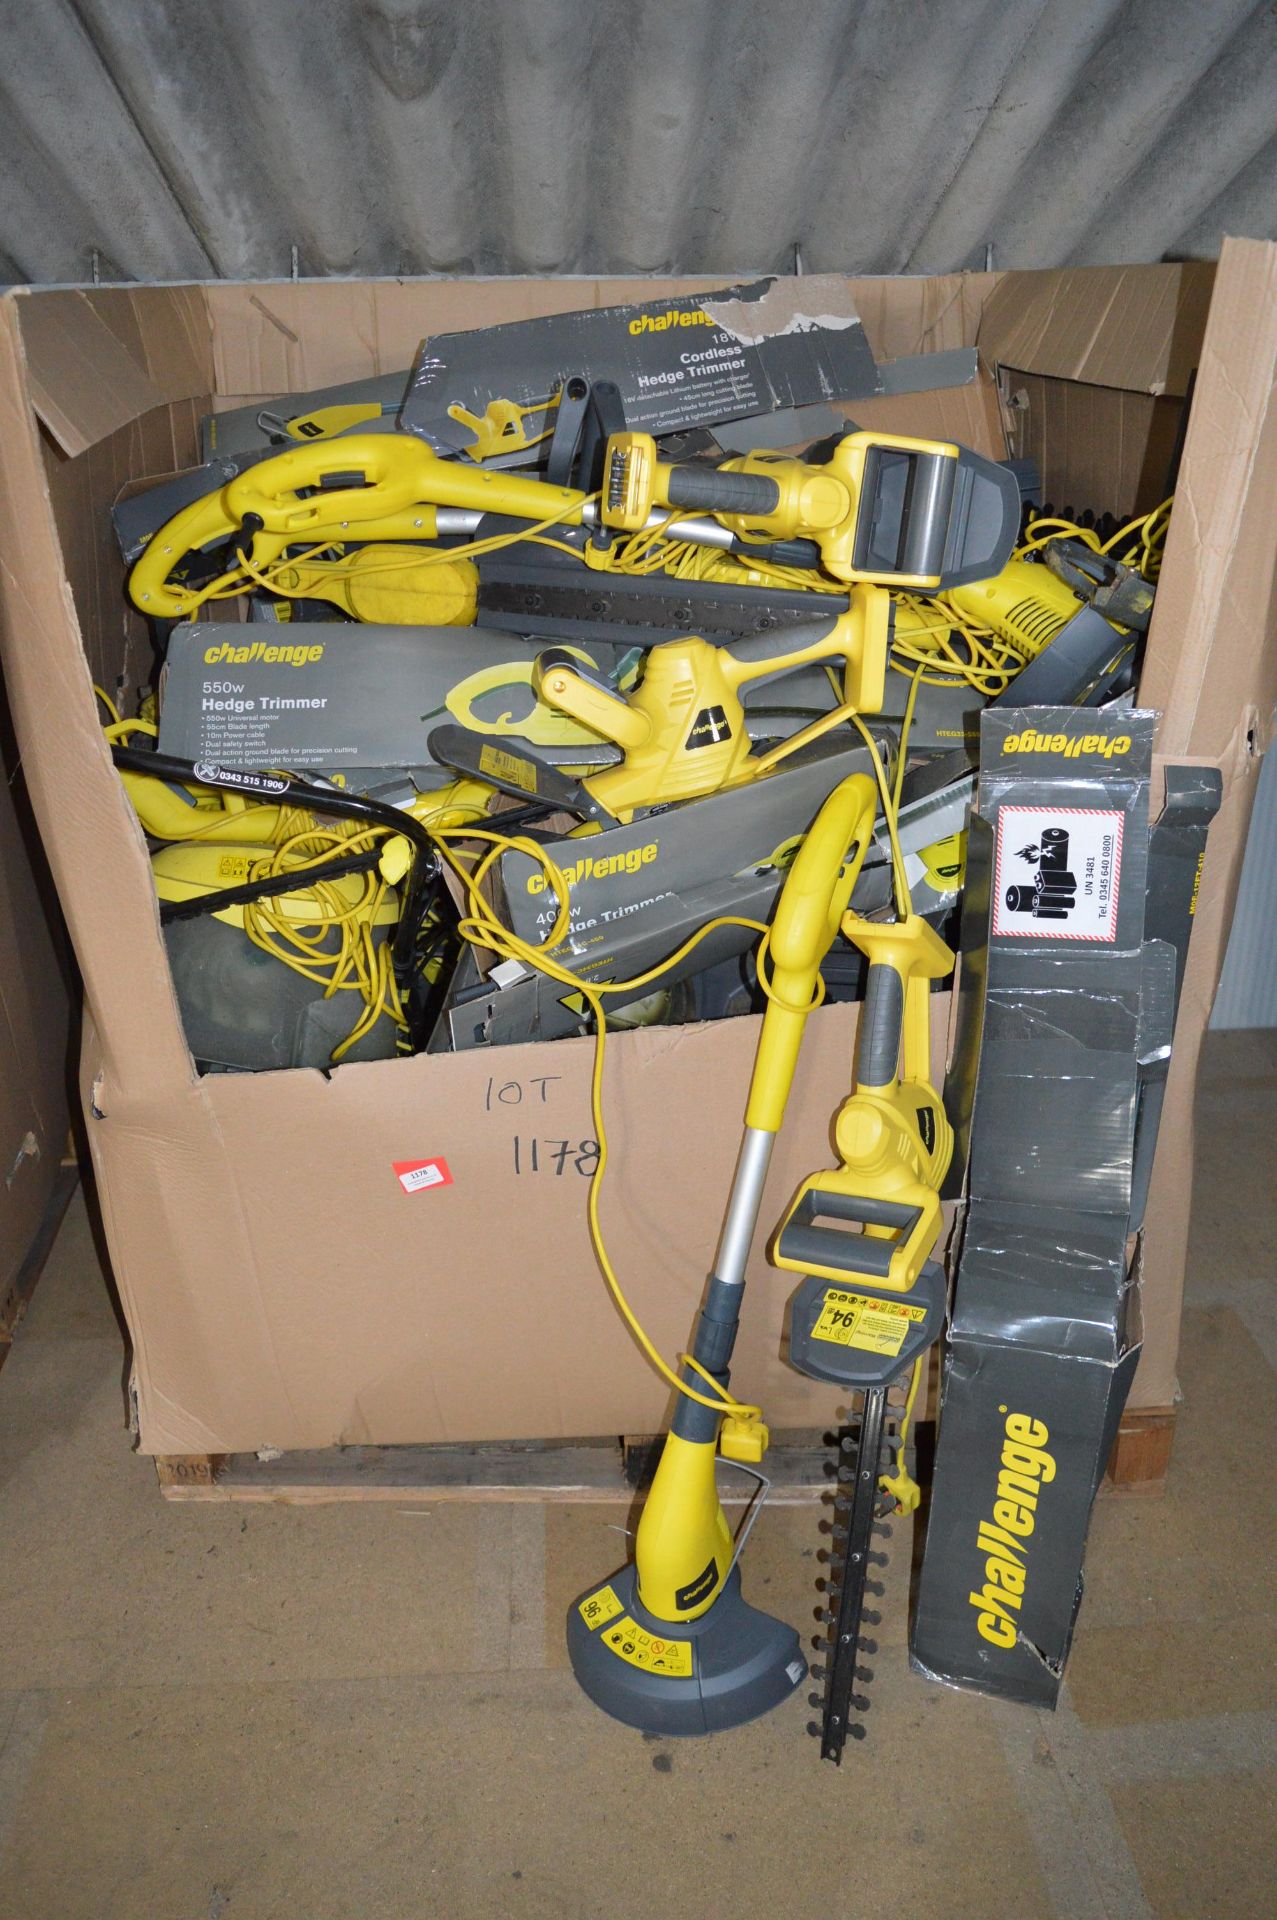 Pallet Containing a Quantity of Challenge Hedge Trimmer and Strimmers (salvage)